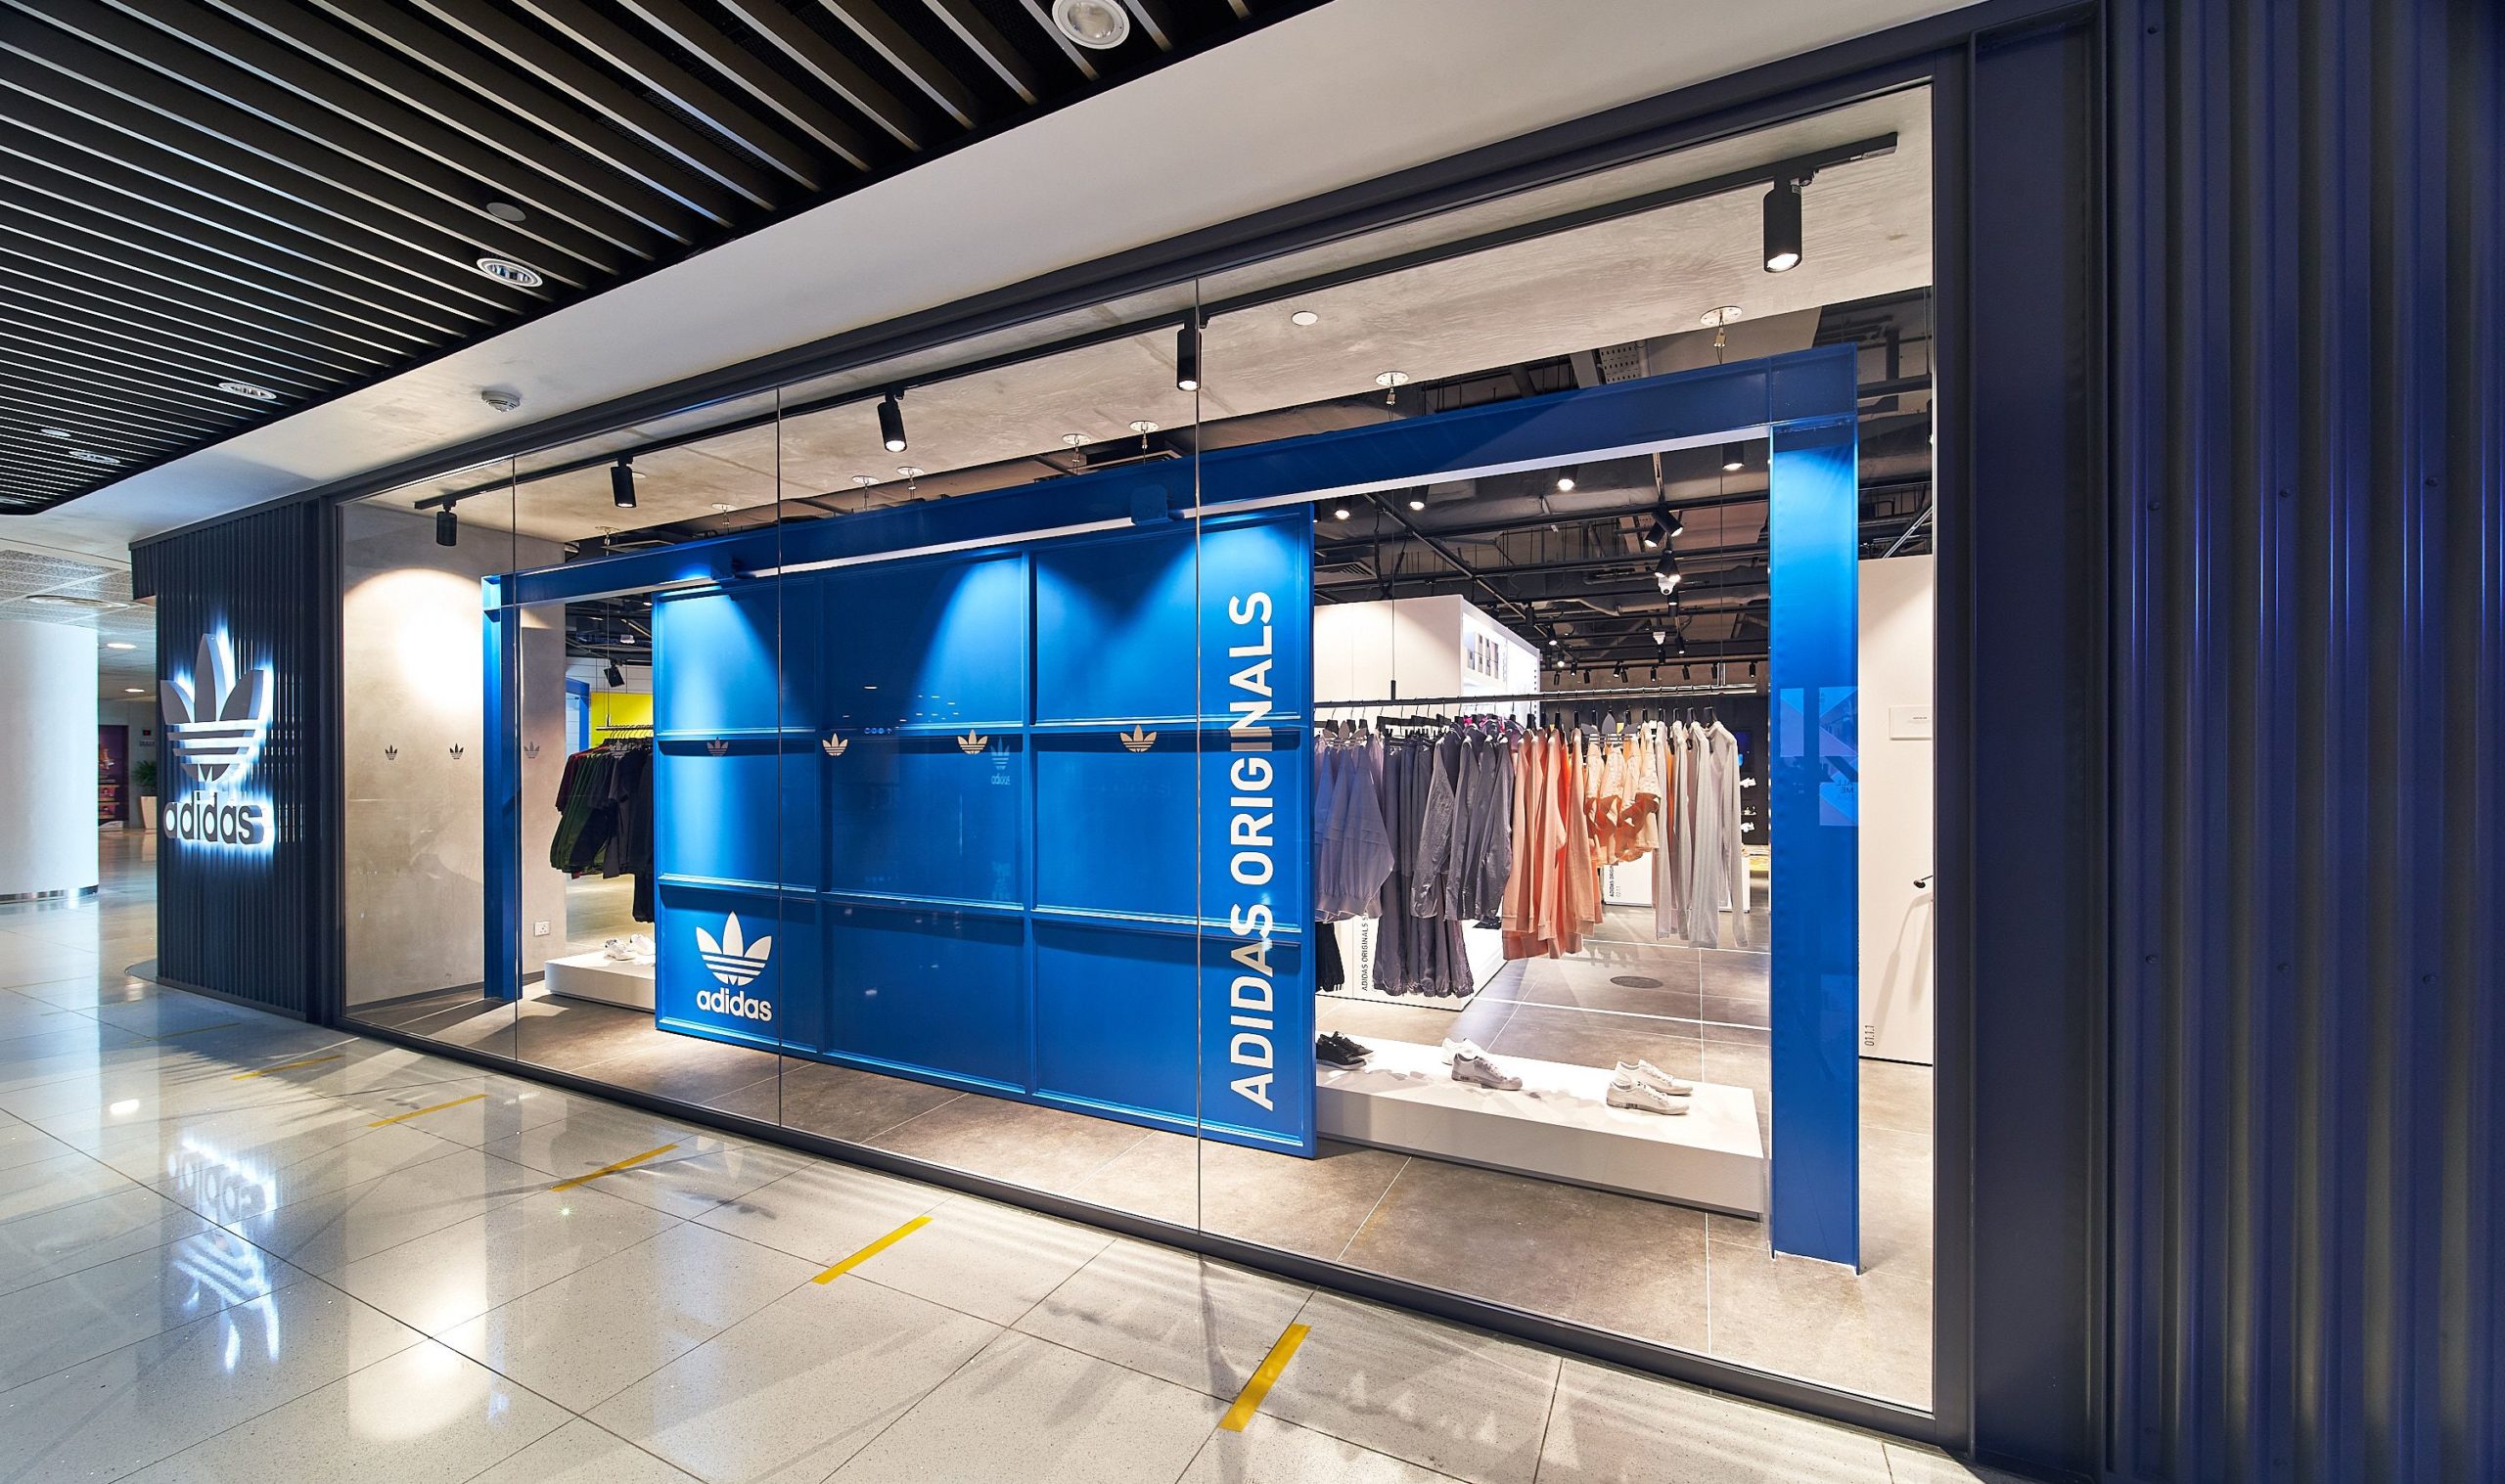 adidas store downtown